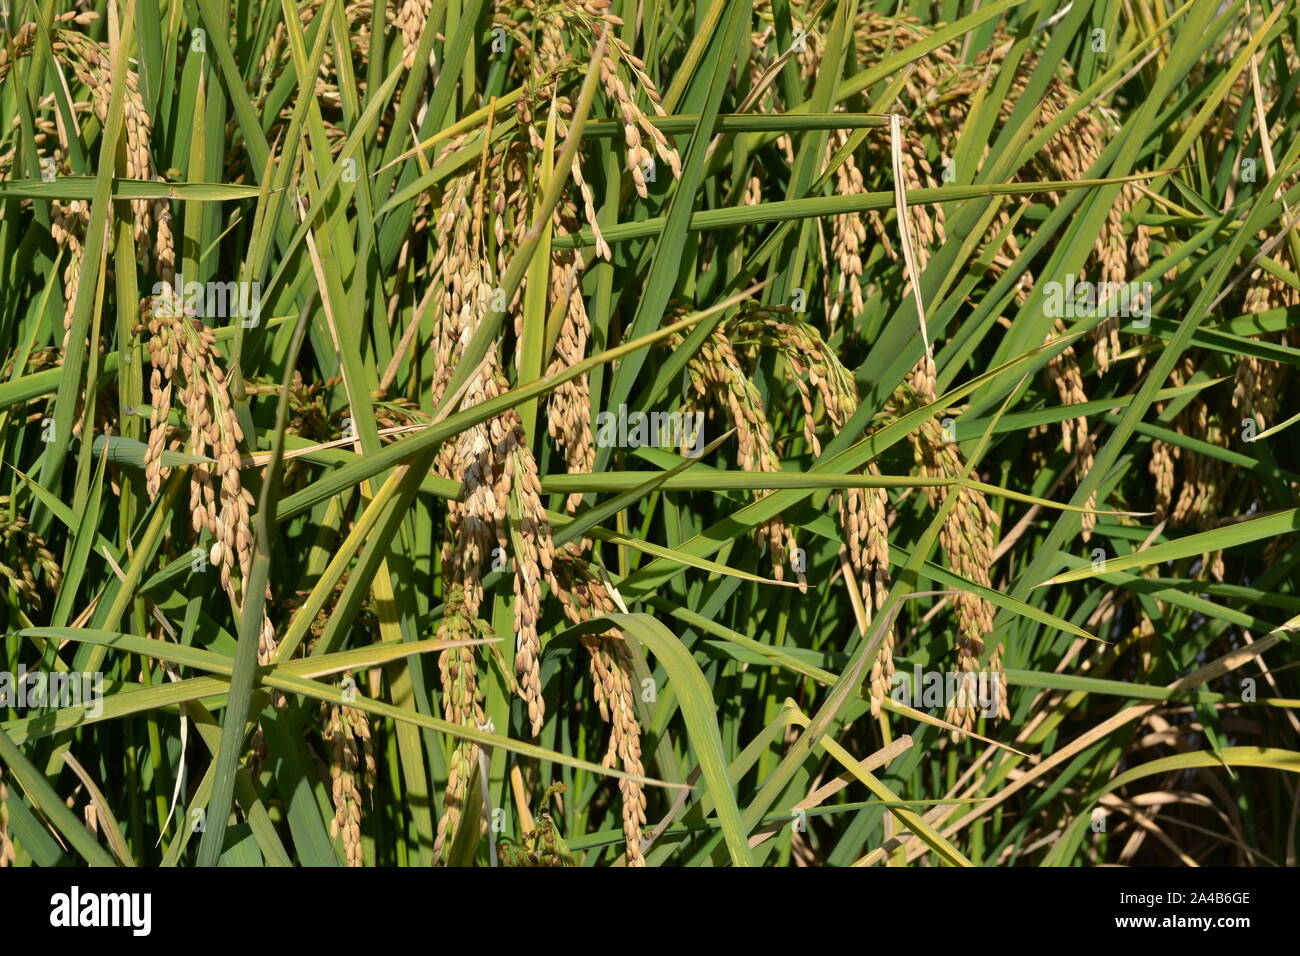 Close-up view to yellow ripe rice clusters in the field on green leaves background in autumn in a sunny day. Stock Photo